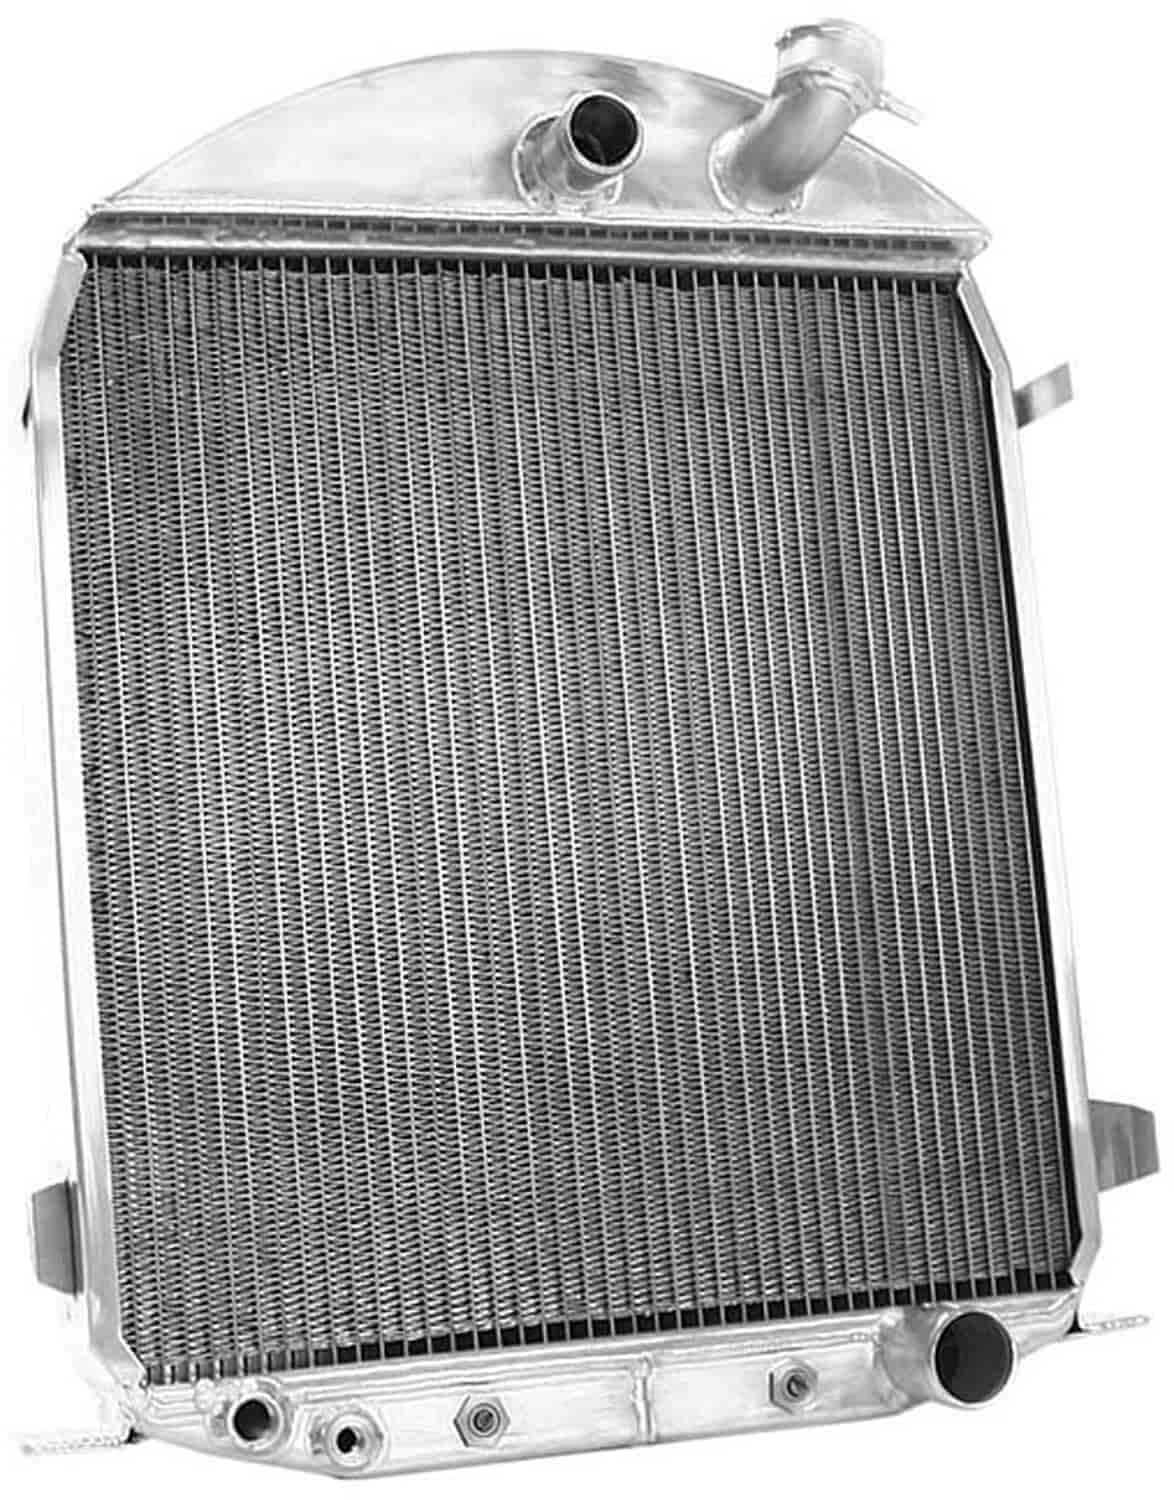 ExactFit Radiator for 1928-1929 Model A with Early